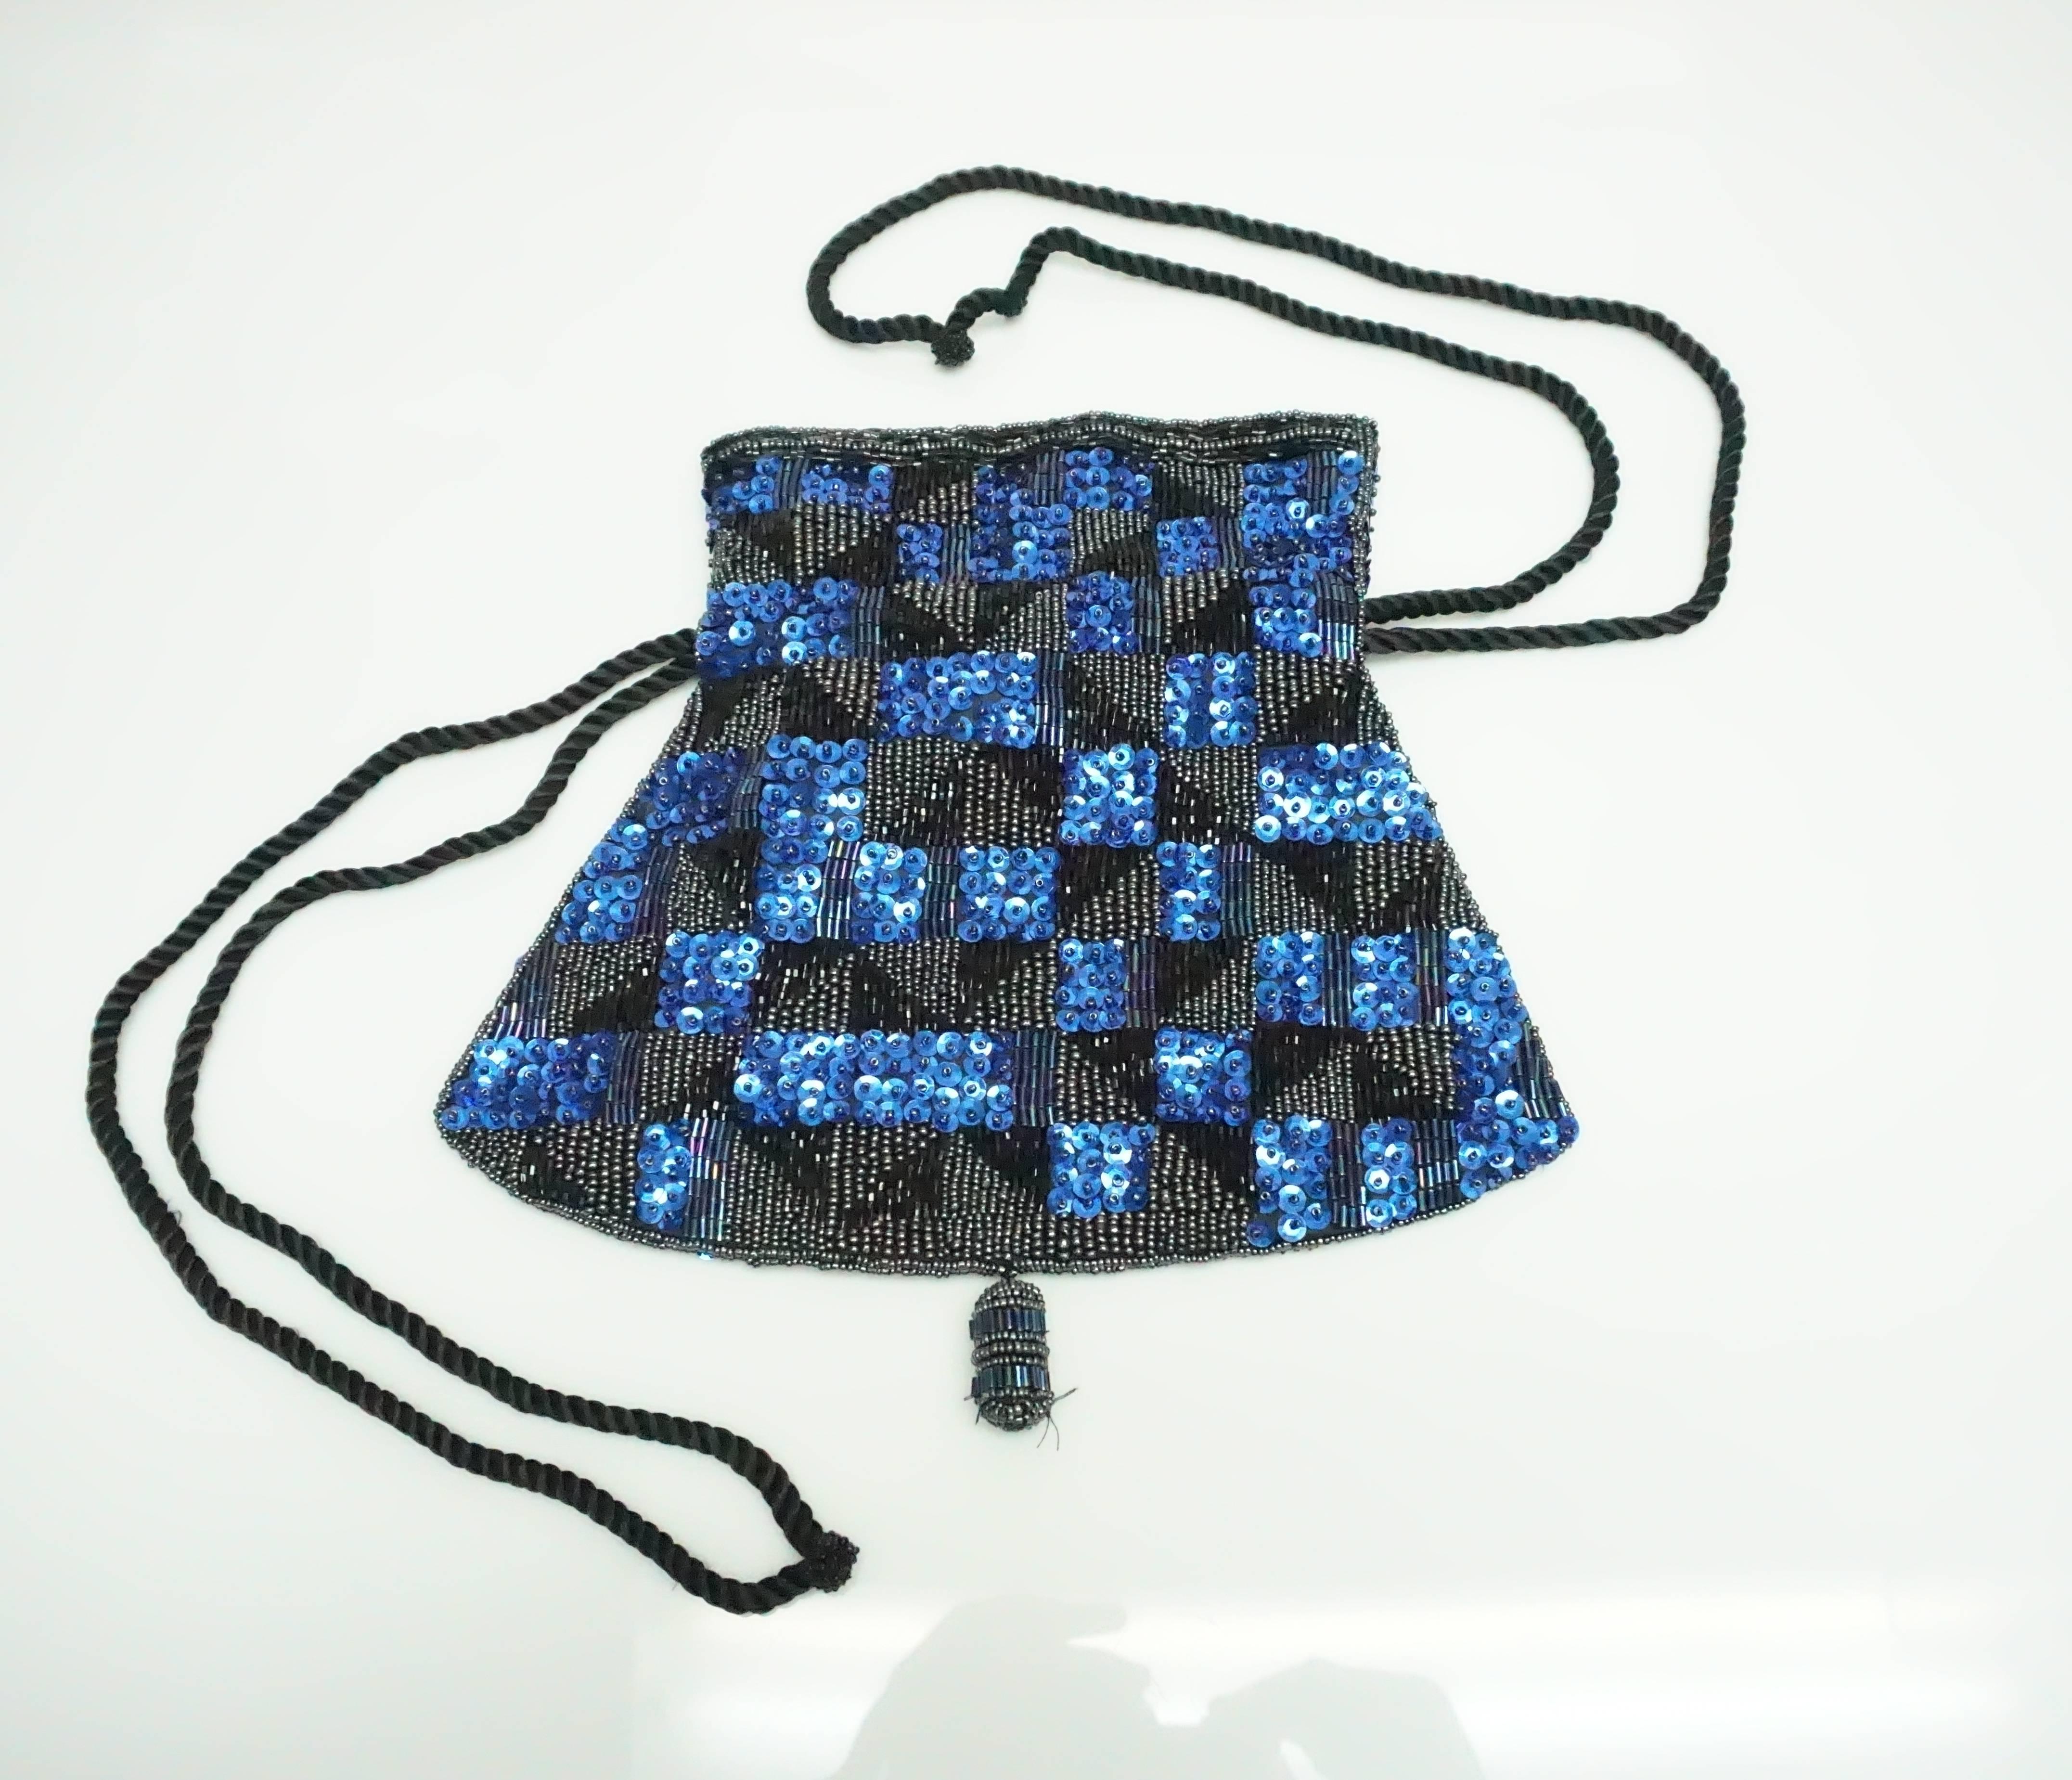 Patrick Sweeney Blue and Black Sequin Bag   This beautiful vintage bag is in excellent condition. The bag is fully covered in sequin and beads. The top of the bag has a boarder of black and metallic beads. The rest of the bag is covered in a